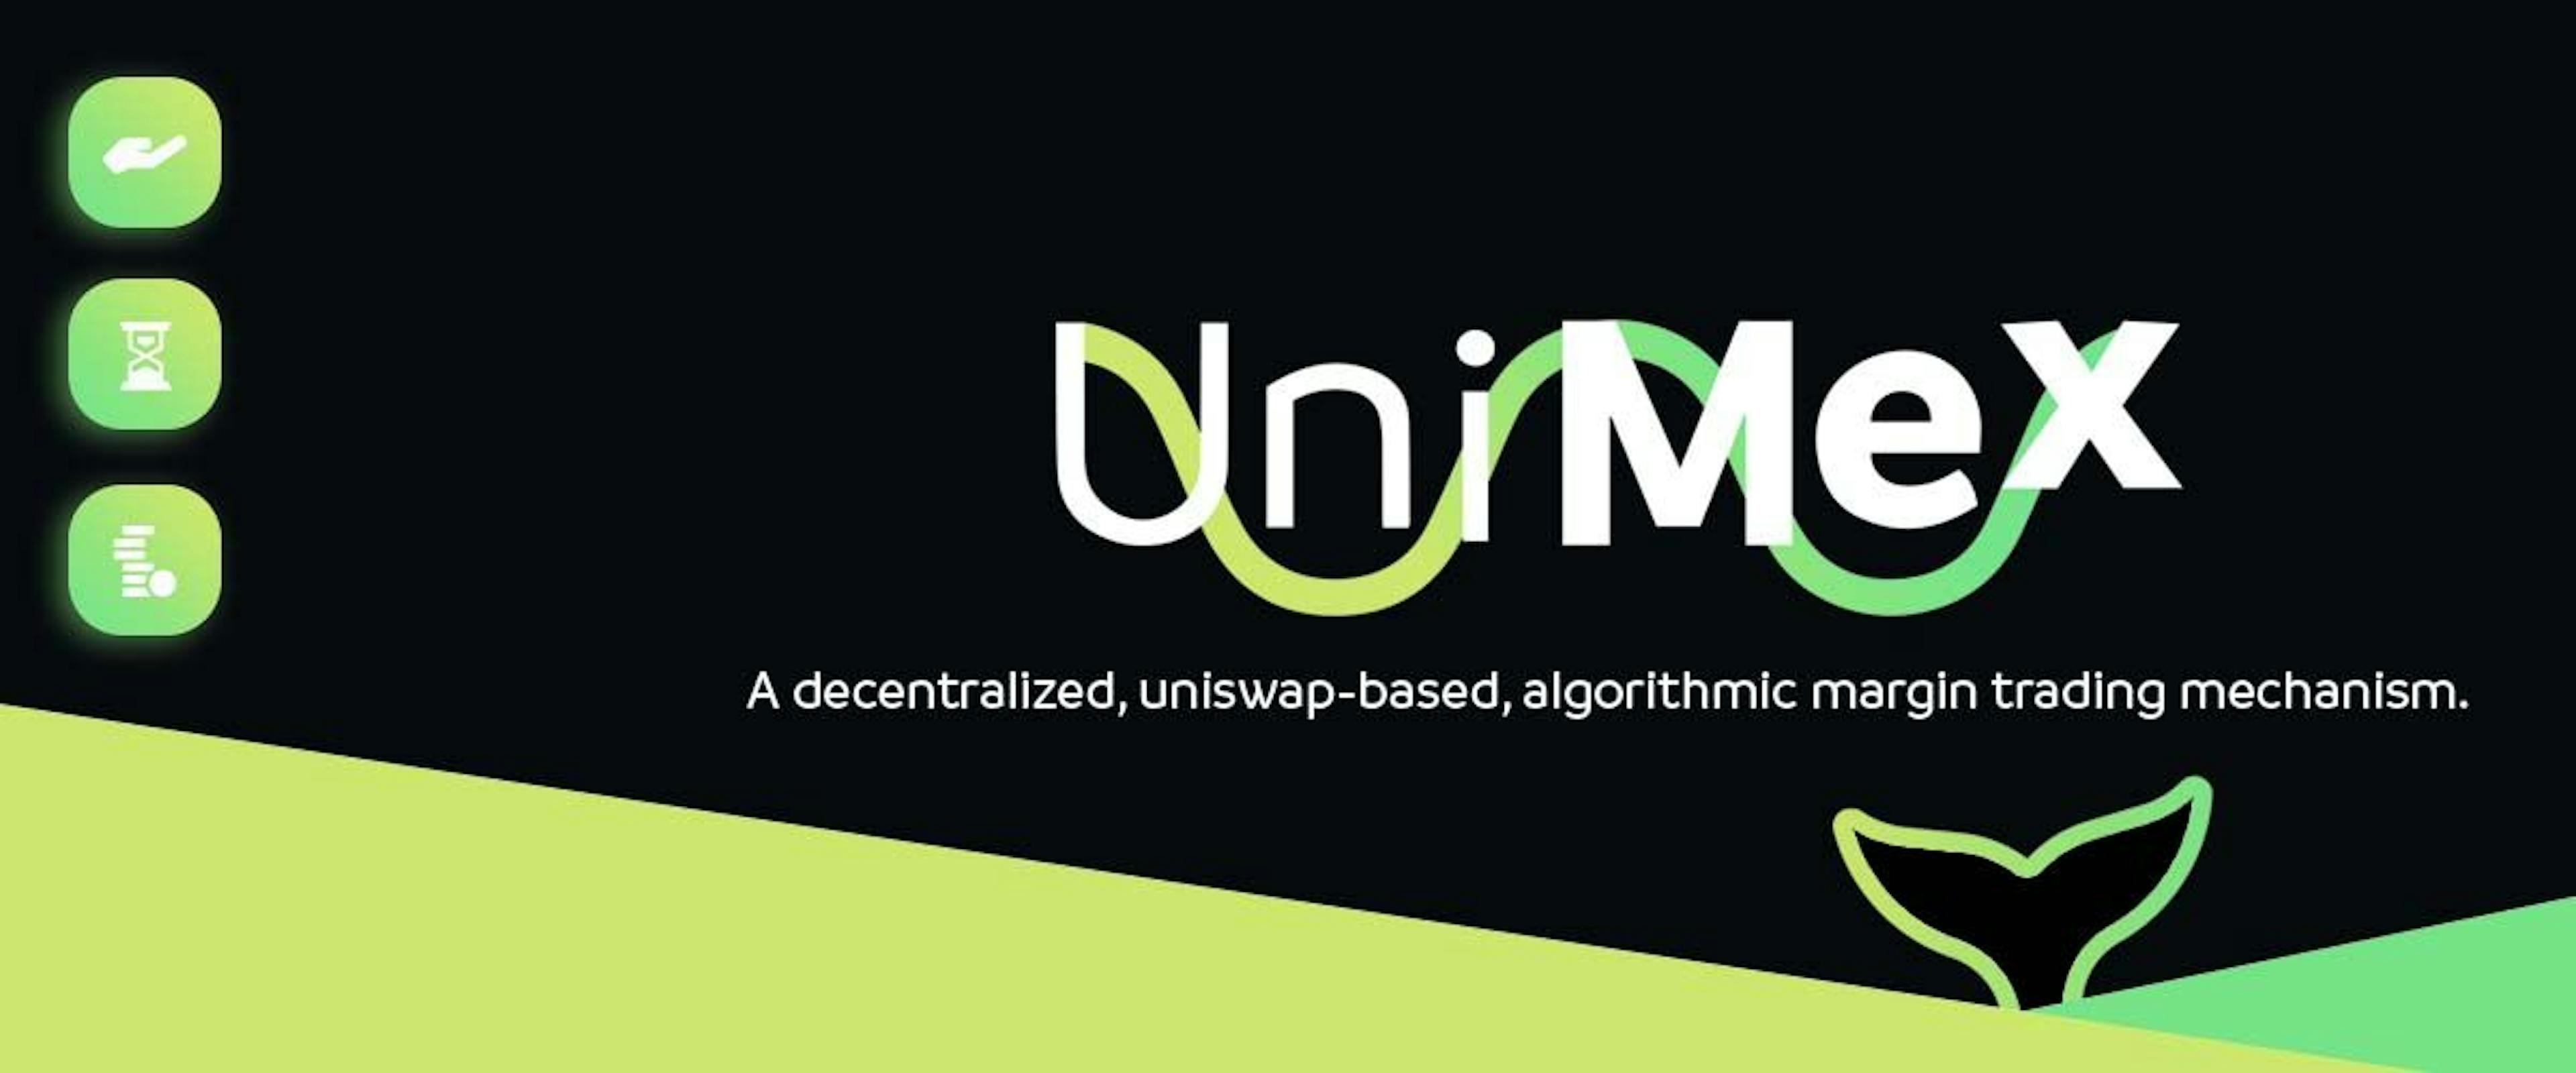 featured image - Decentralized Algorithmic Margin Trading Is Now A Reality For DeFi Users